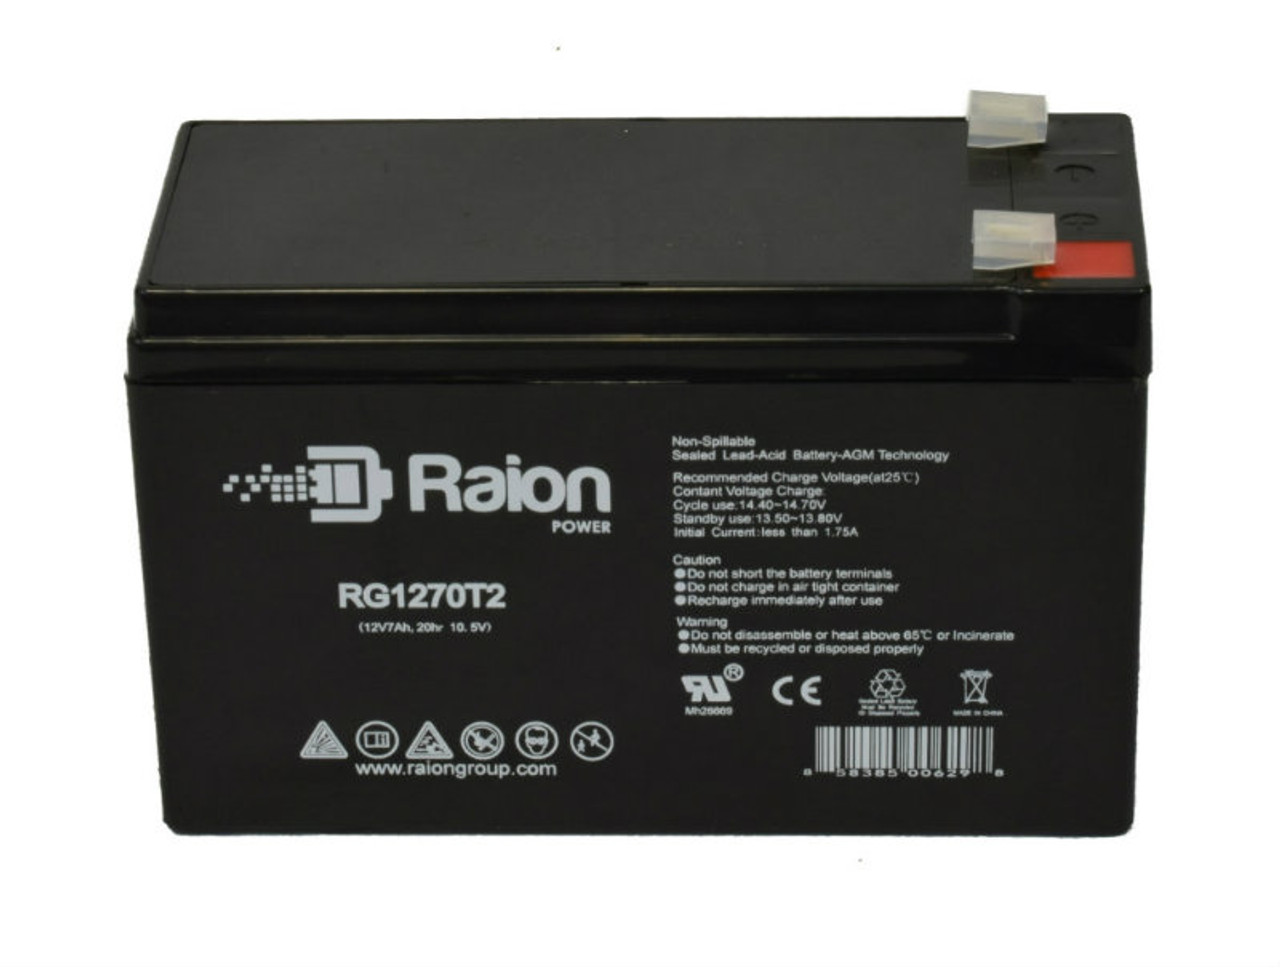 Raion Power RG1270T1 12V 7Ah Lead Acid Battery for Motion Madness Canada Goose Peck And Sweep Feeder Head Content